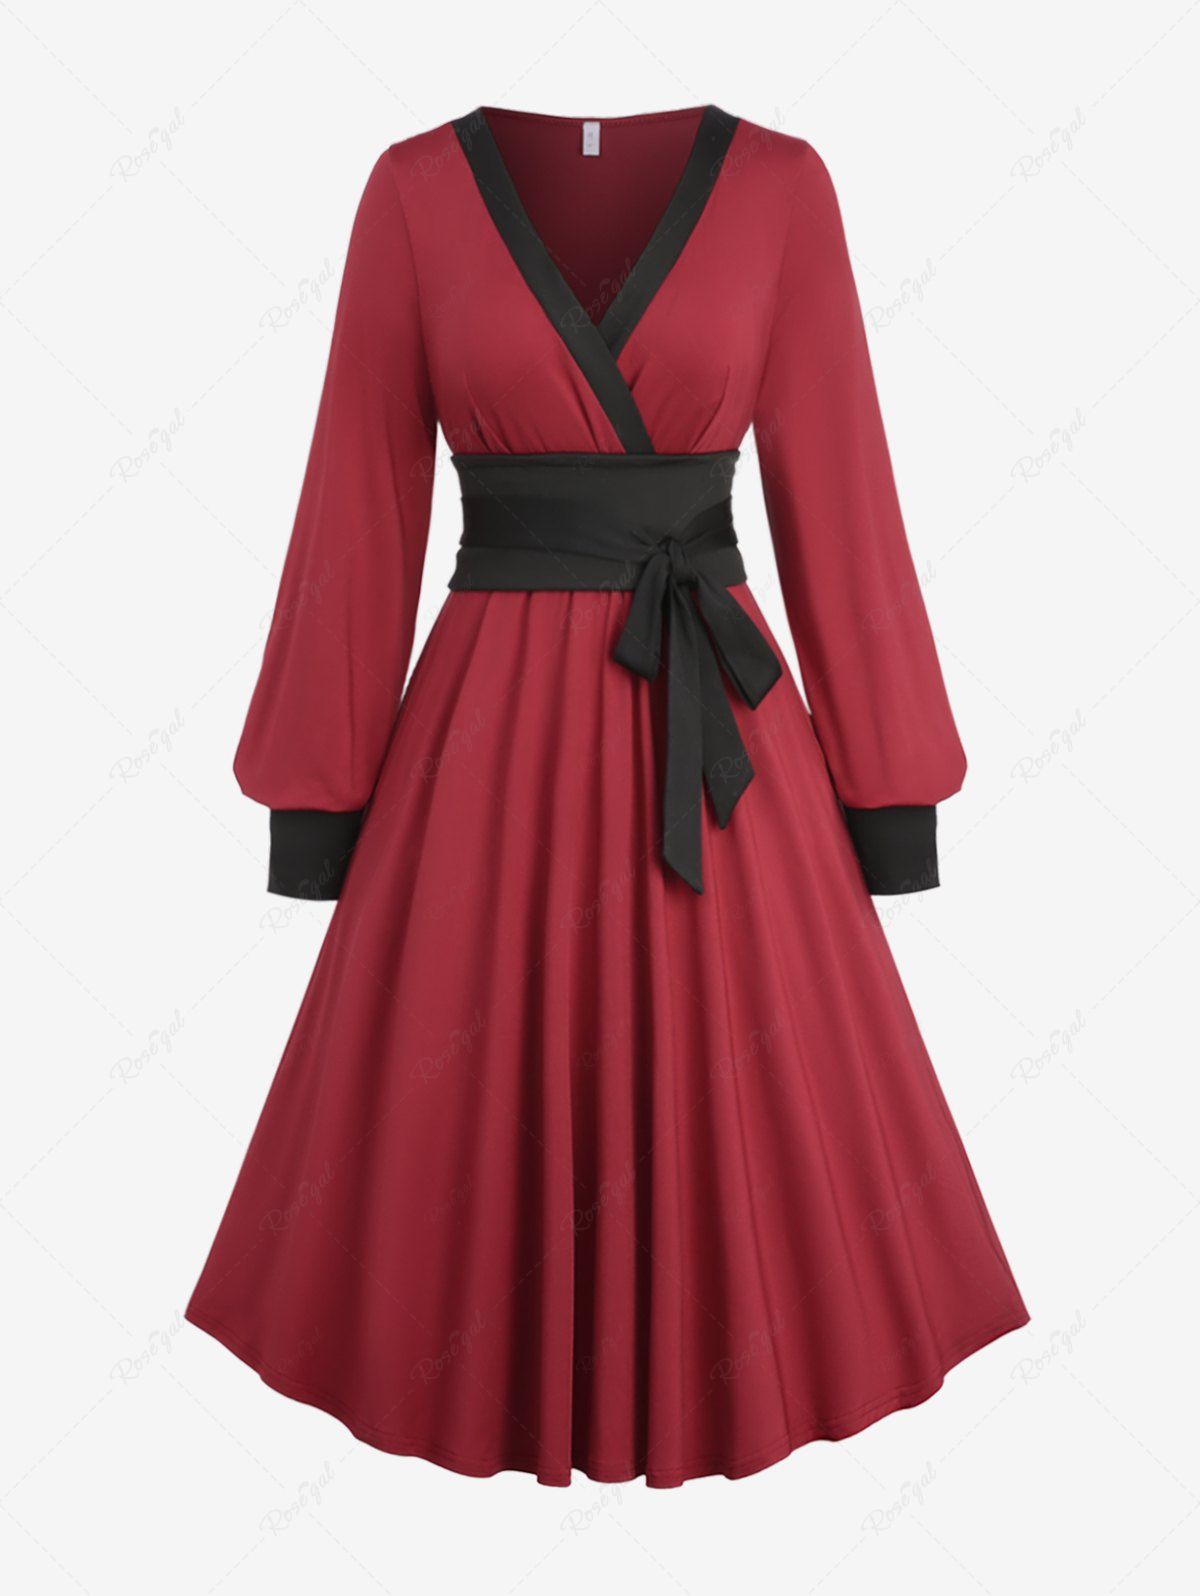 Trendy Plus Size Surplice Ruffles Bishop Sleeve A Line Chinese Style Dress with Bowknot Tie Belt  